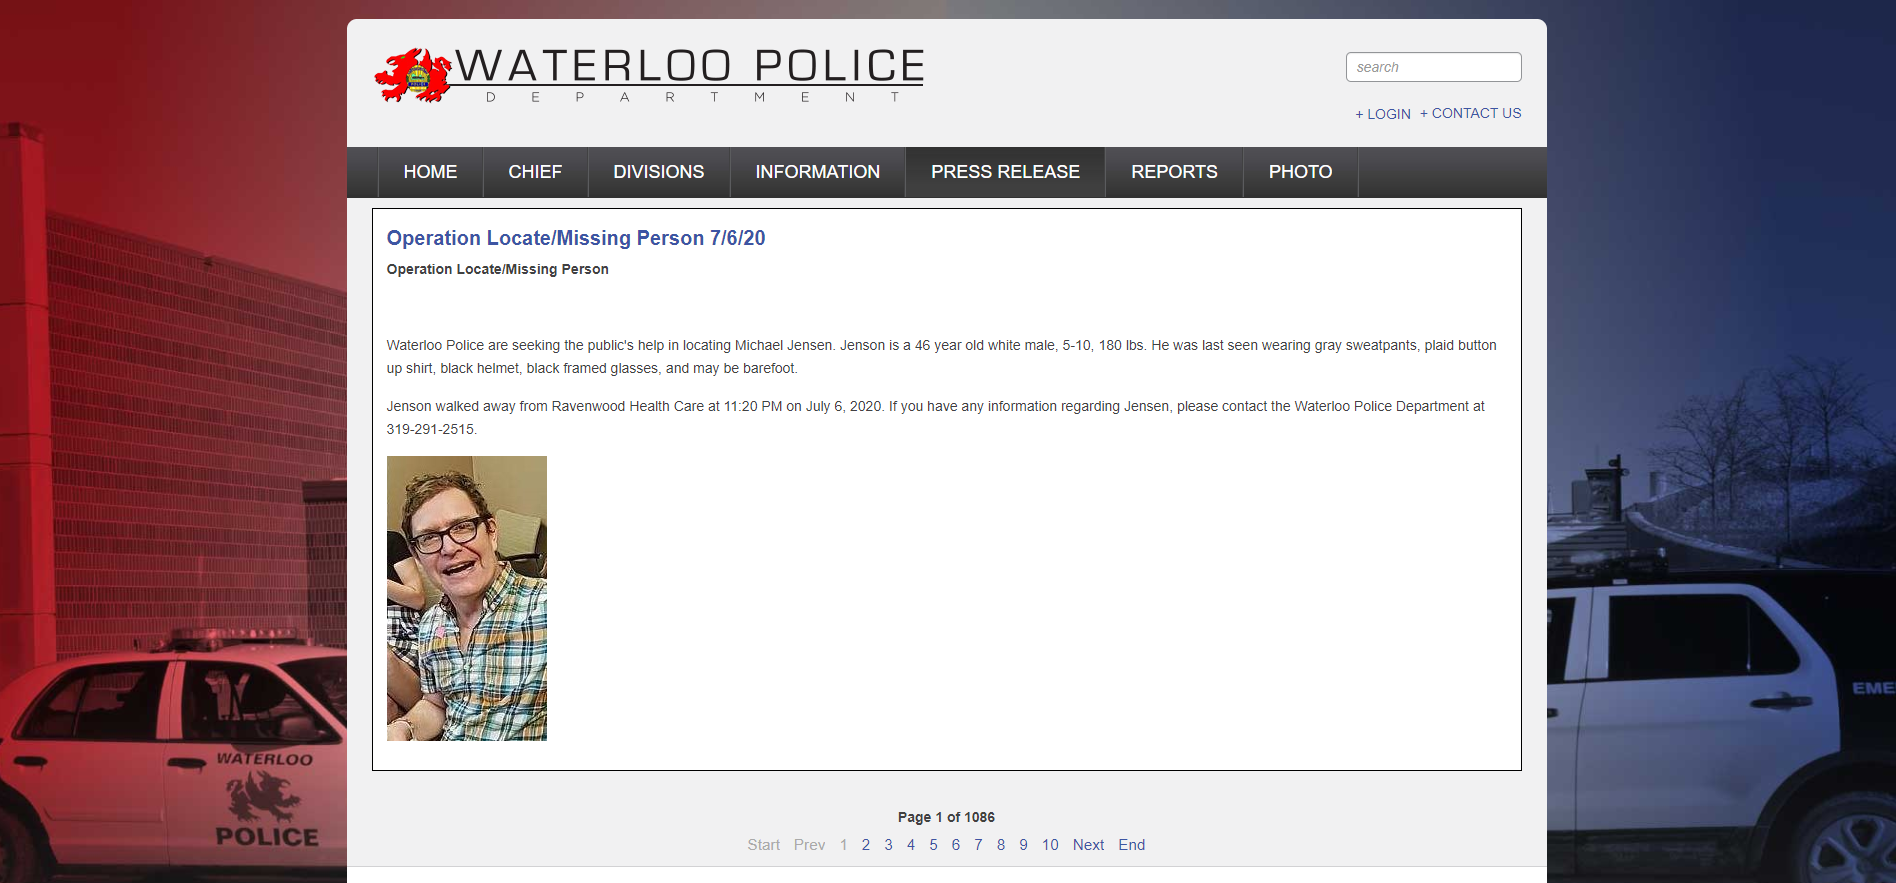 Link to Waterloo Police Department Press Release on Michael Jenson